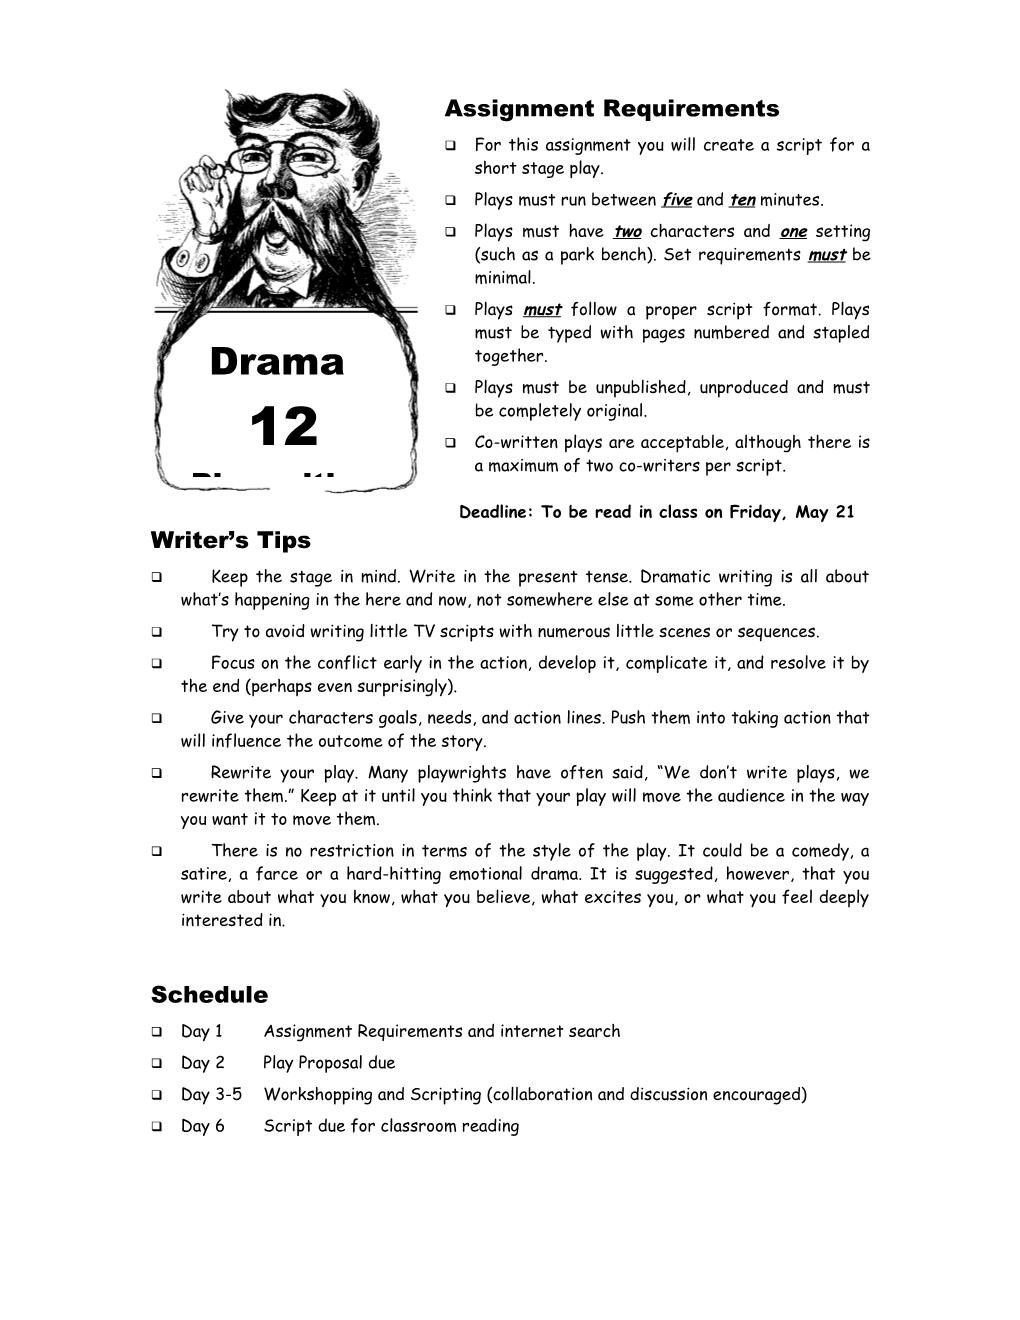 The Emphasis in Drama 11 Is on the Process of Creating Script and Bringing the Script To